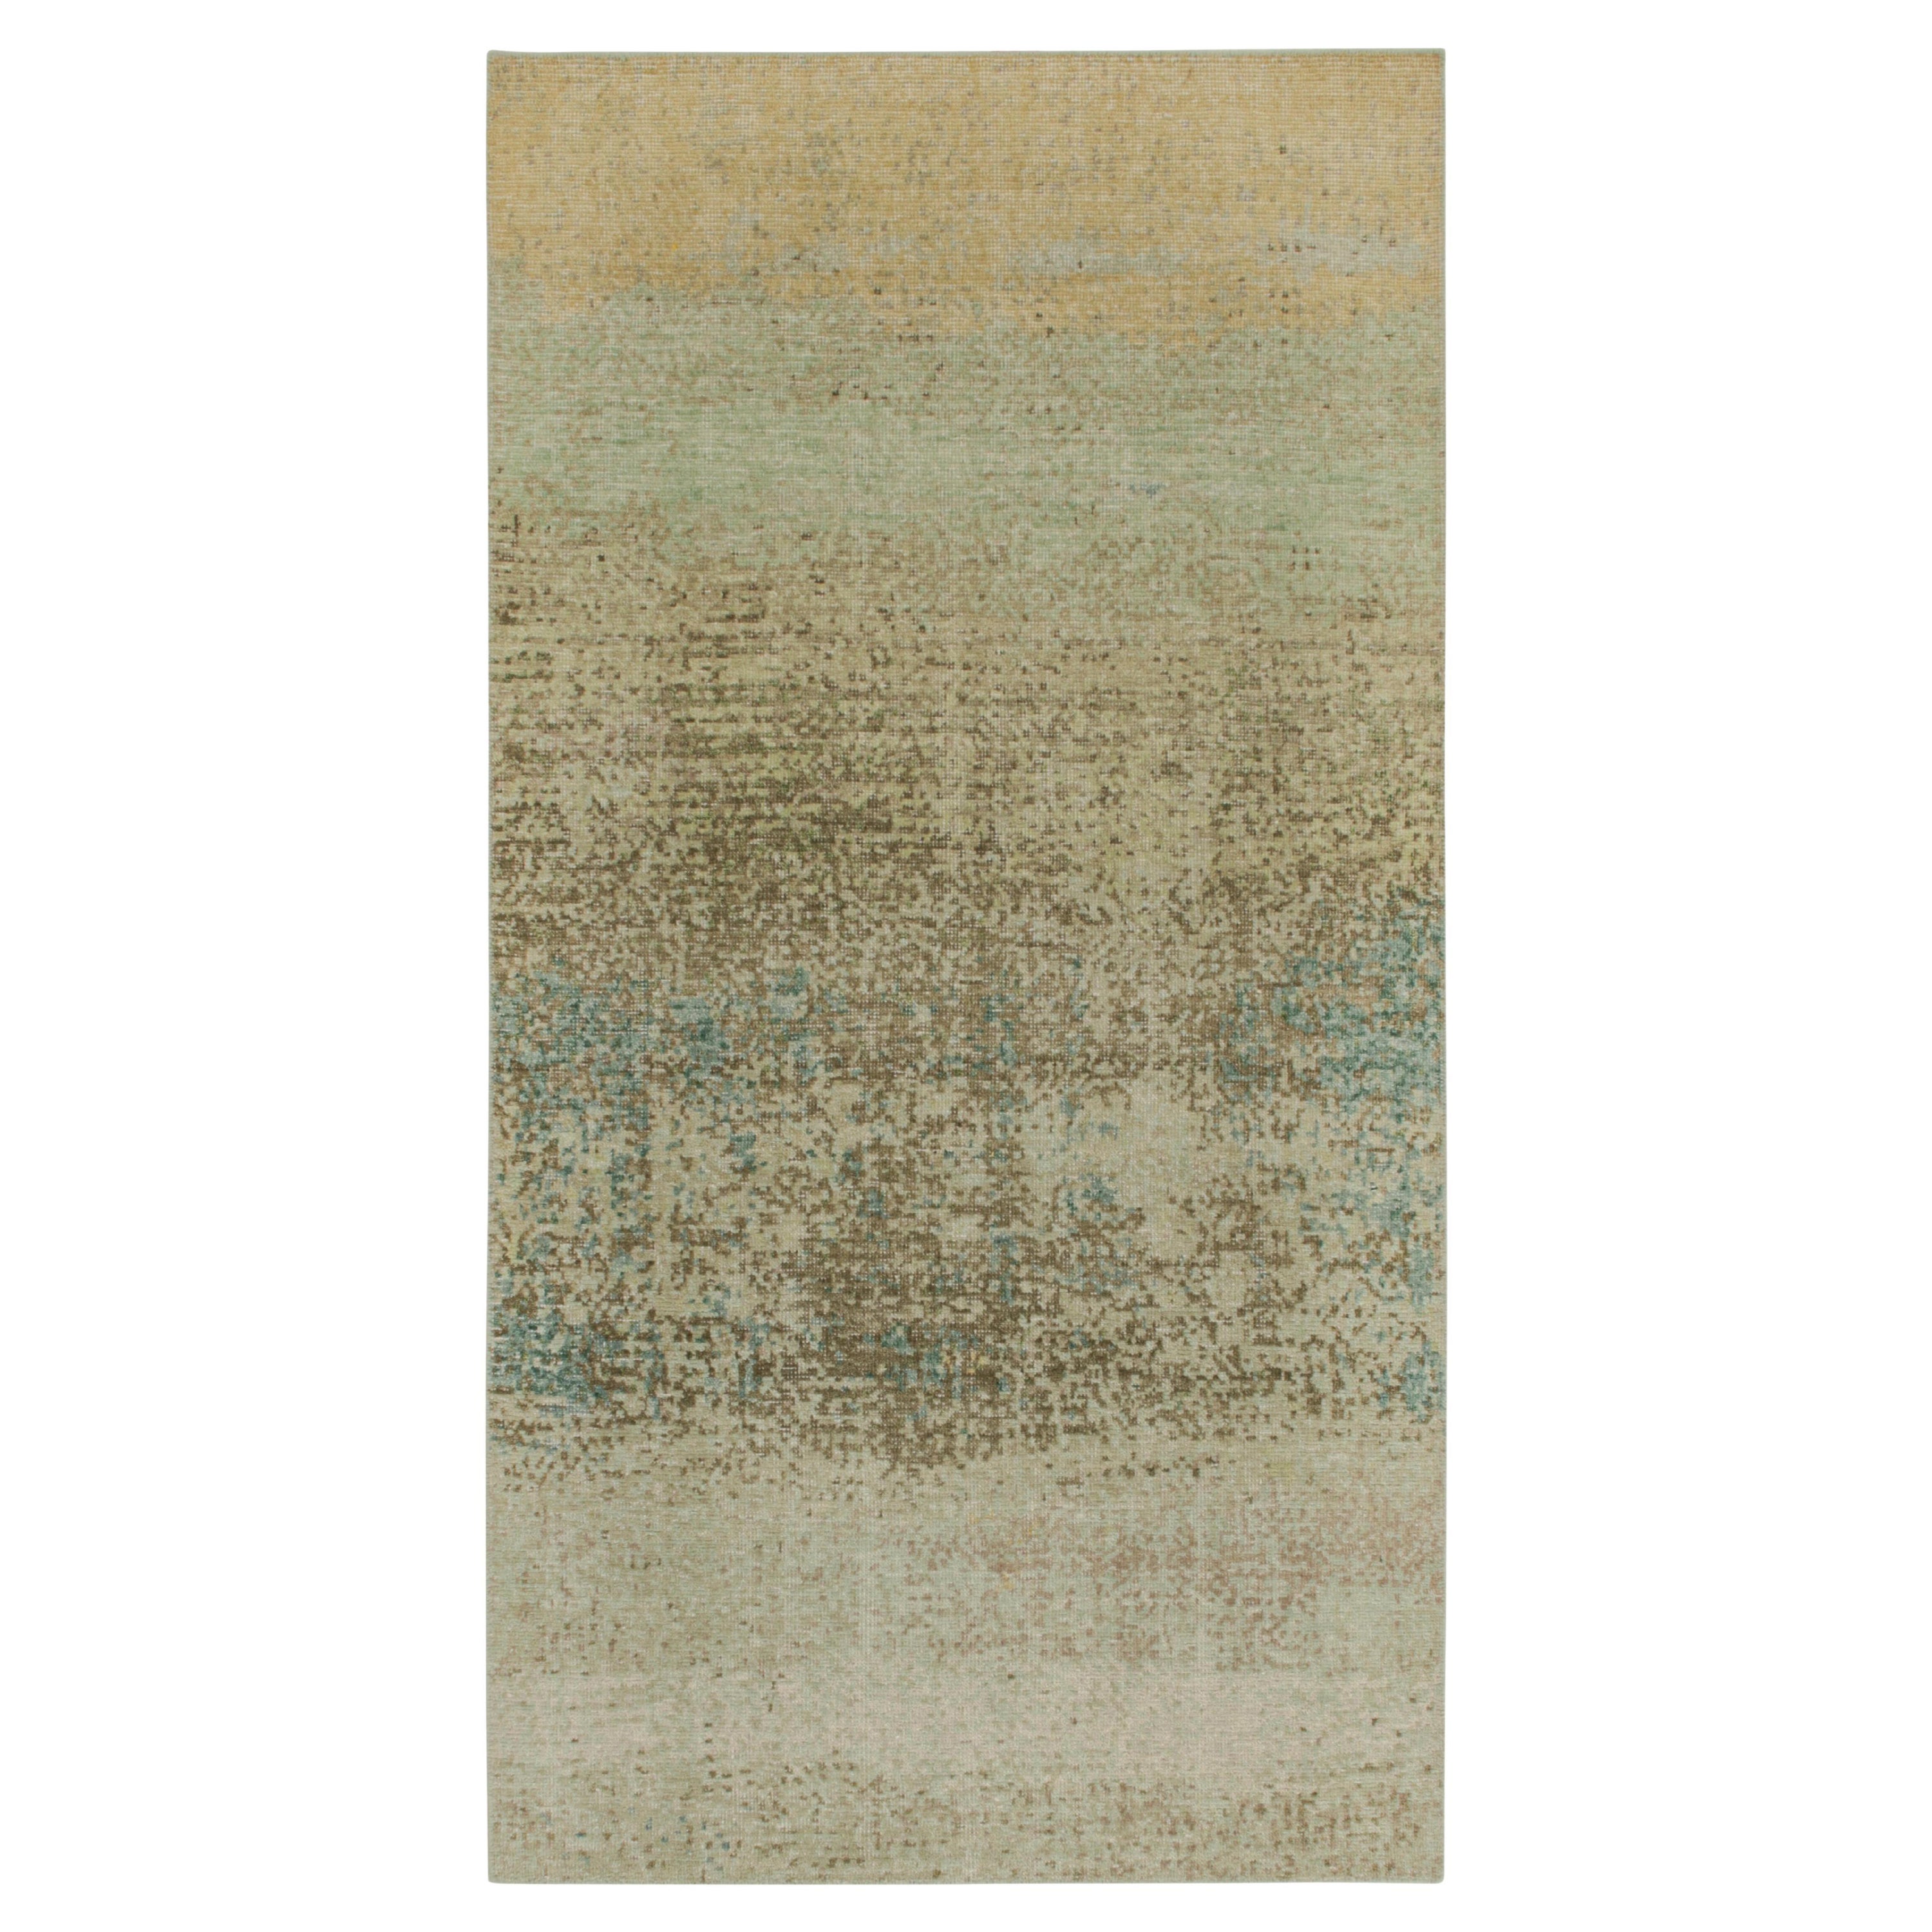 Rug & Kilim’s Distressed Style Abstract Rug in Beige, Blue and Green Pattern